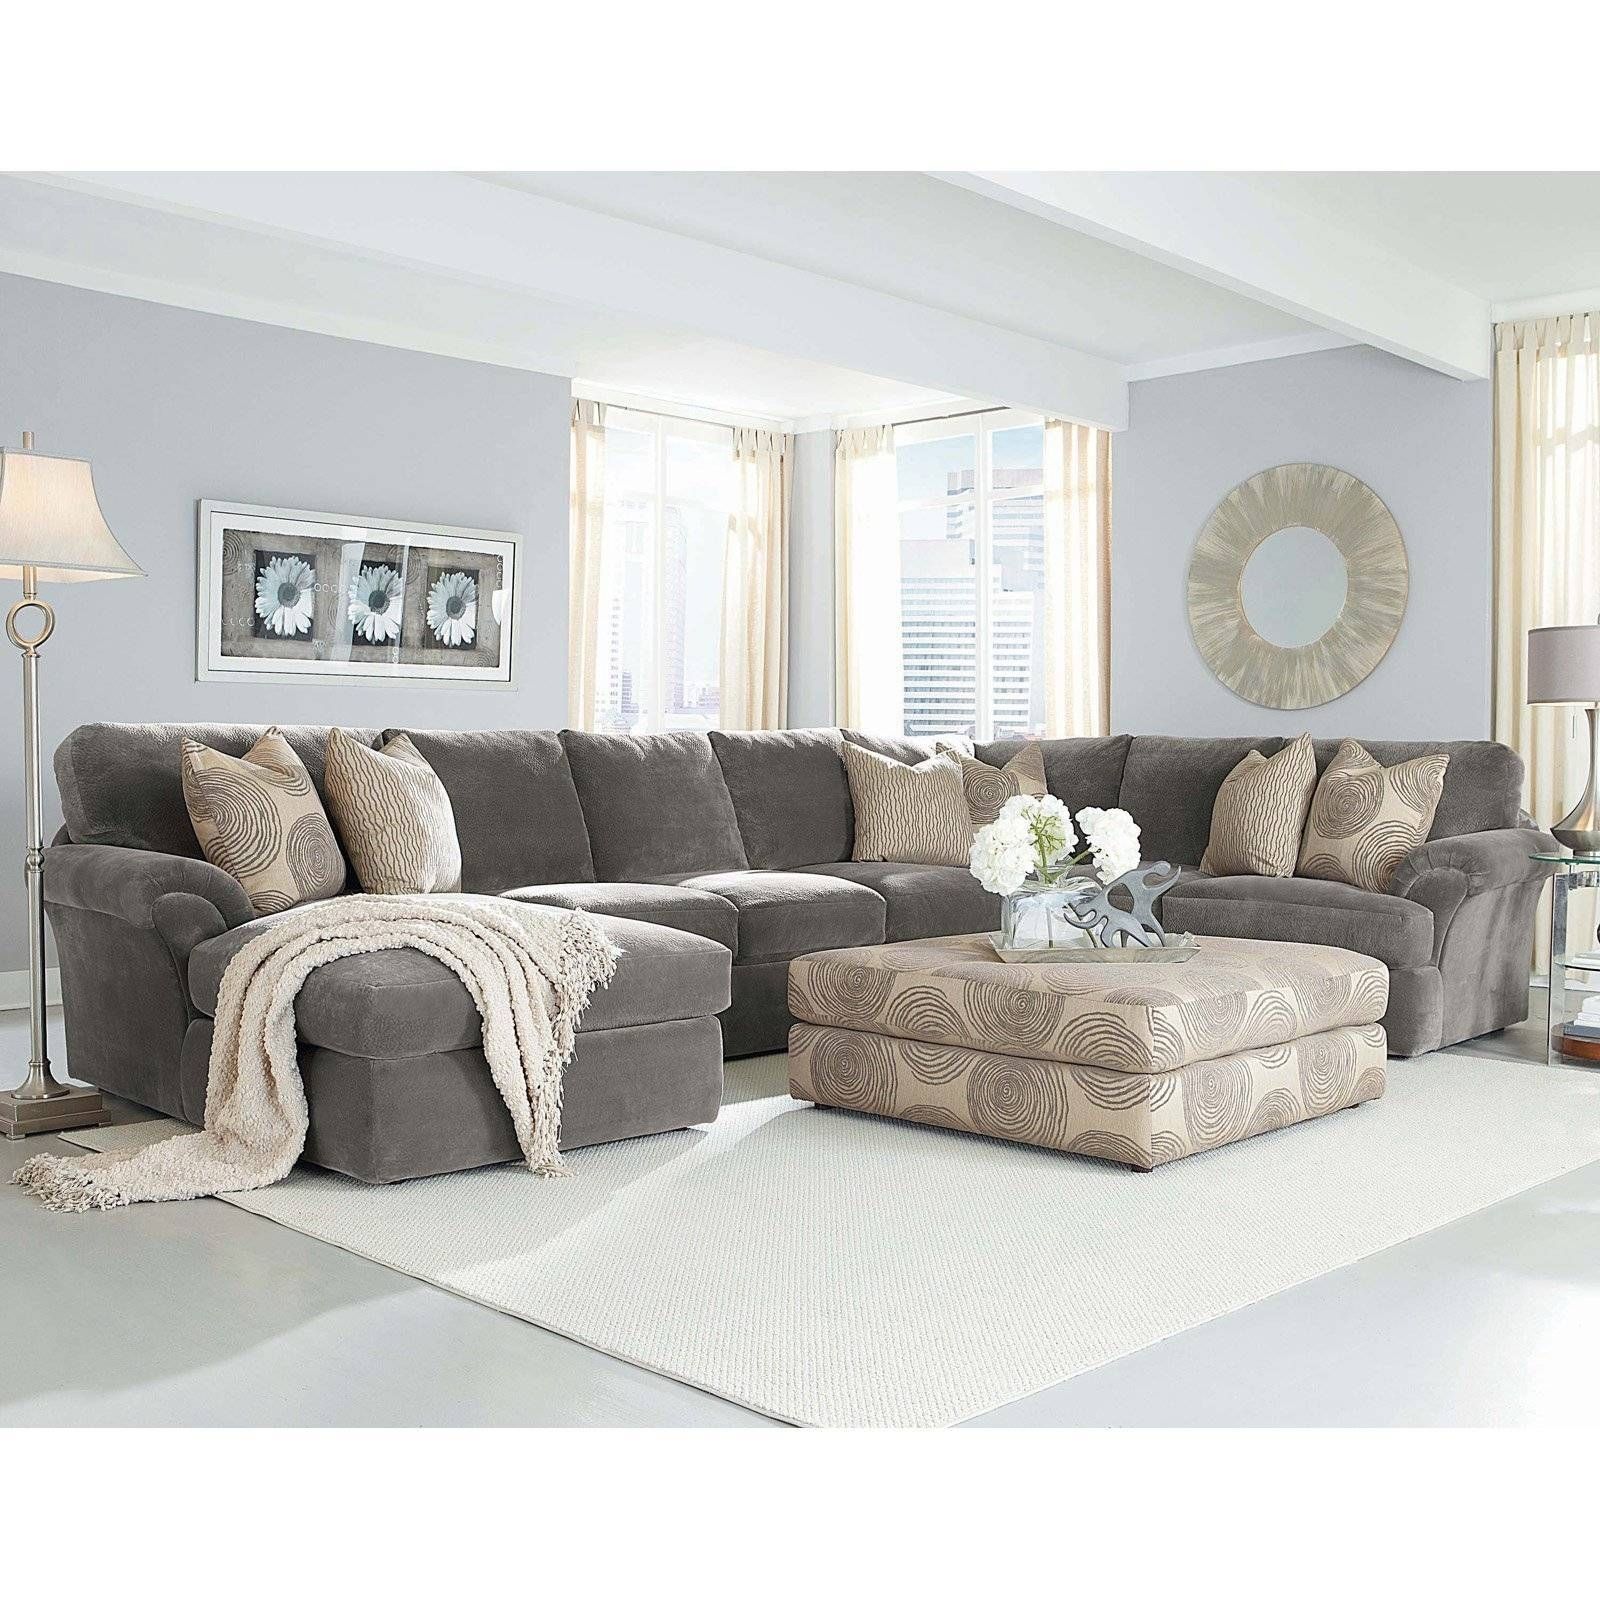 41+ Incredible Photos Of Grey Sectional Living Room Ideas Ideas Throughout Dark Gray Sectional Sofas (View 4 of 20)